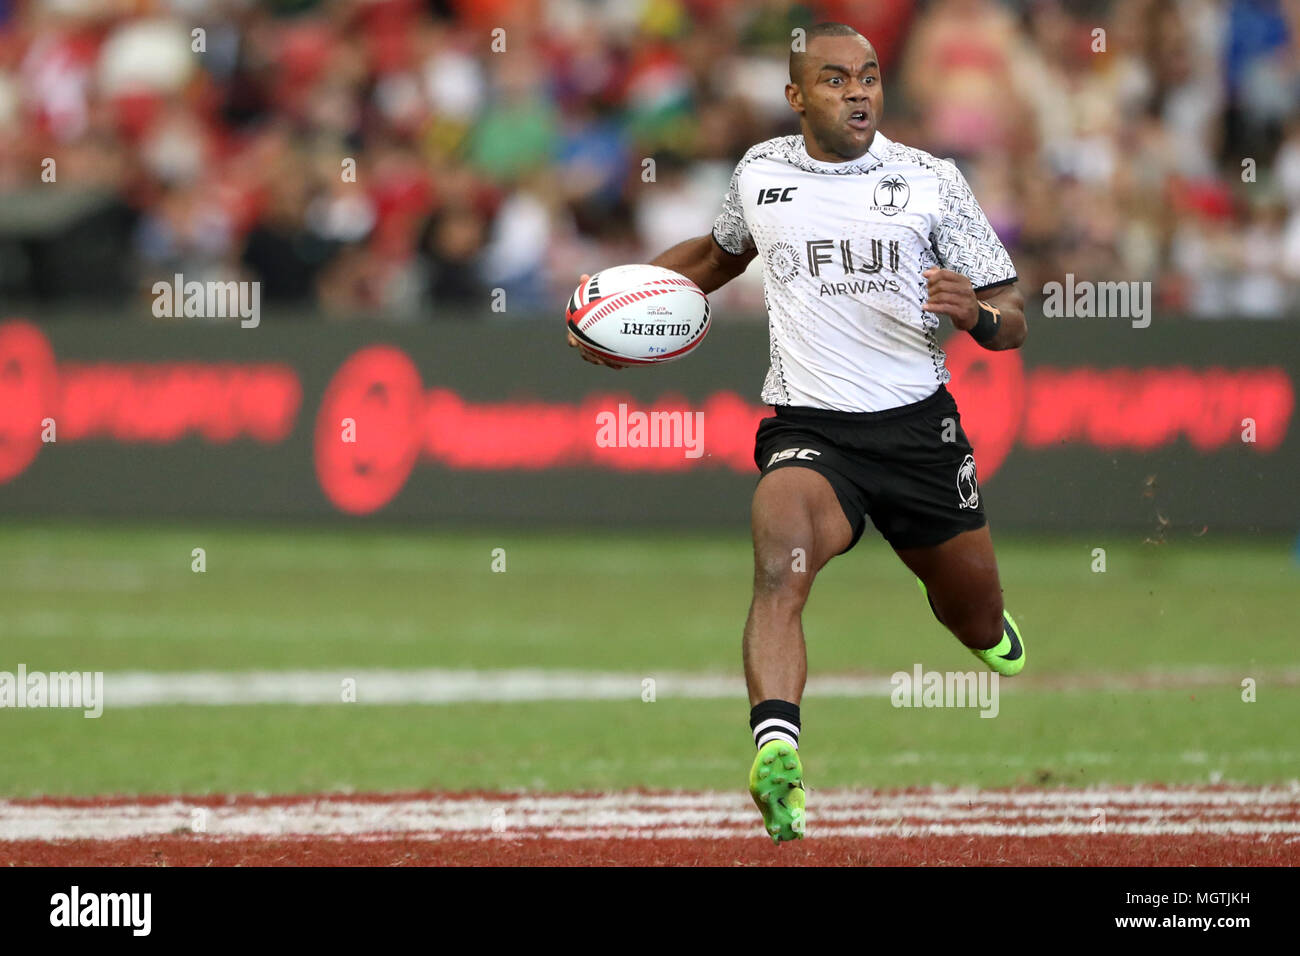 Singapore. 29th Apr, 2018. Alasio Sovita Naduva of Fiji runs with the ball during the Cup Semi Final match between Fiji and South Africa at the Rugby Sevens tournament at the National Stadium. Singapore. Credit: Paul Miller/ZUMA Wire/Alamy Live News Stock Photo